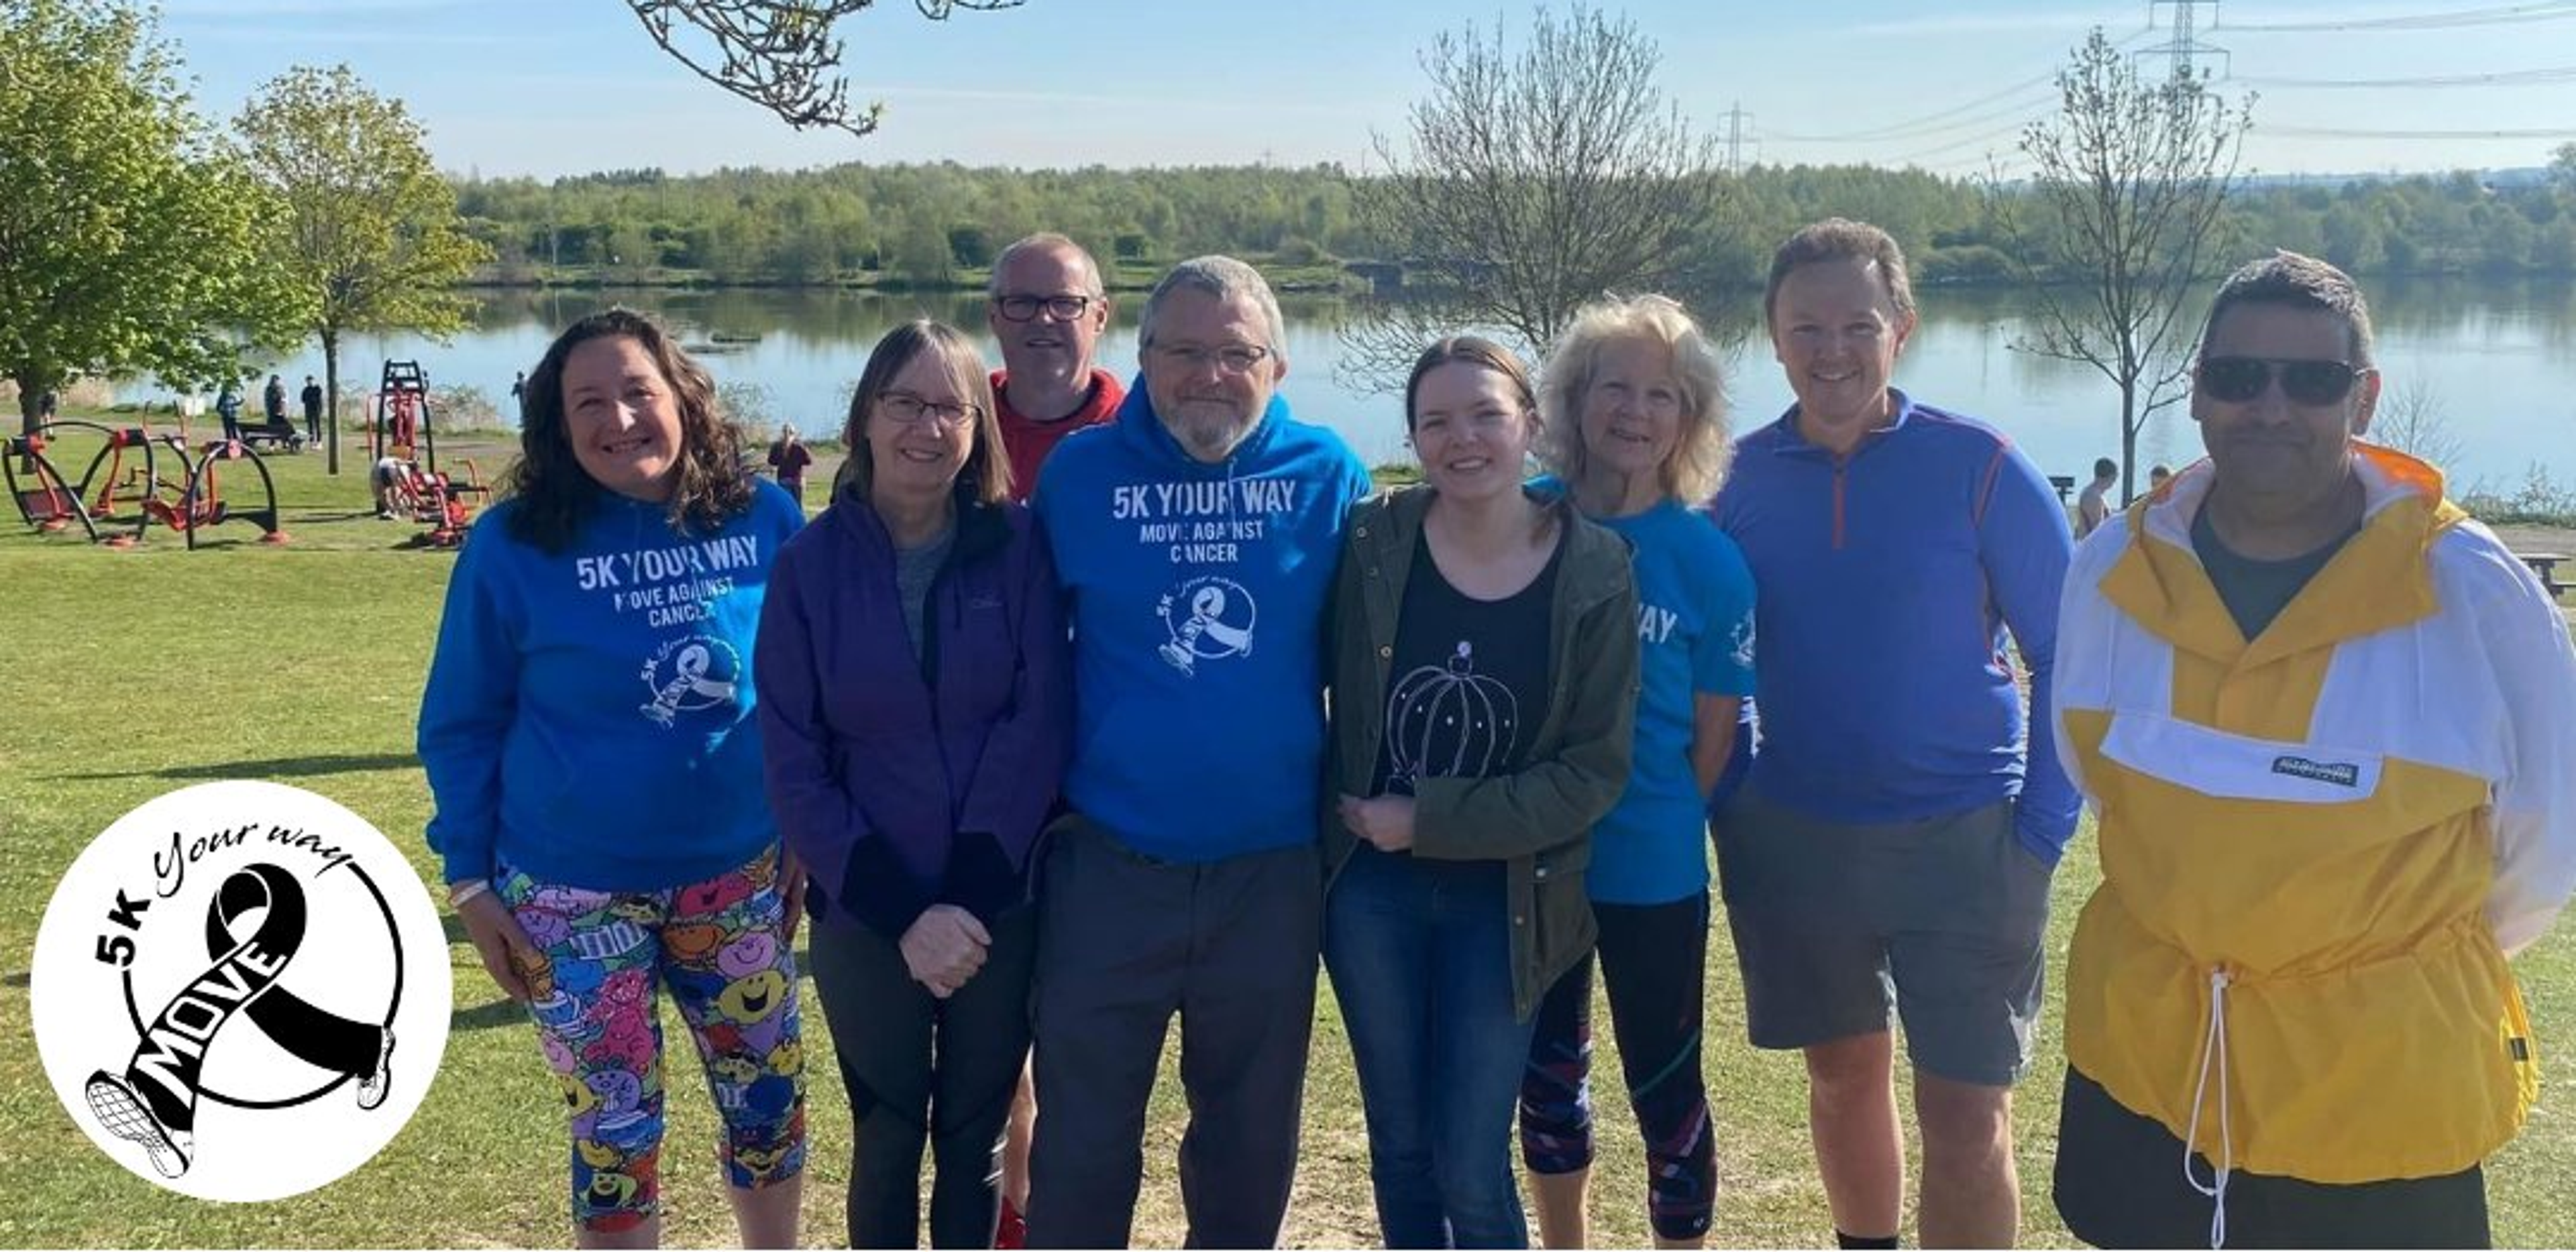 A group of people - four women and four men - stand in front of a lake just before they are due to take part in a 5k run to support cancer care and research.